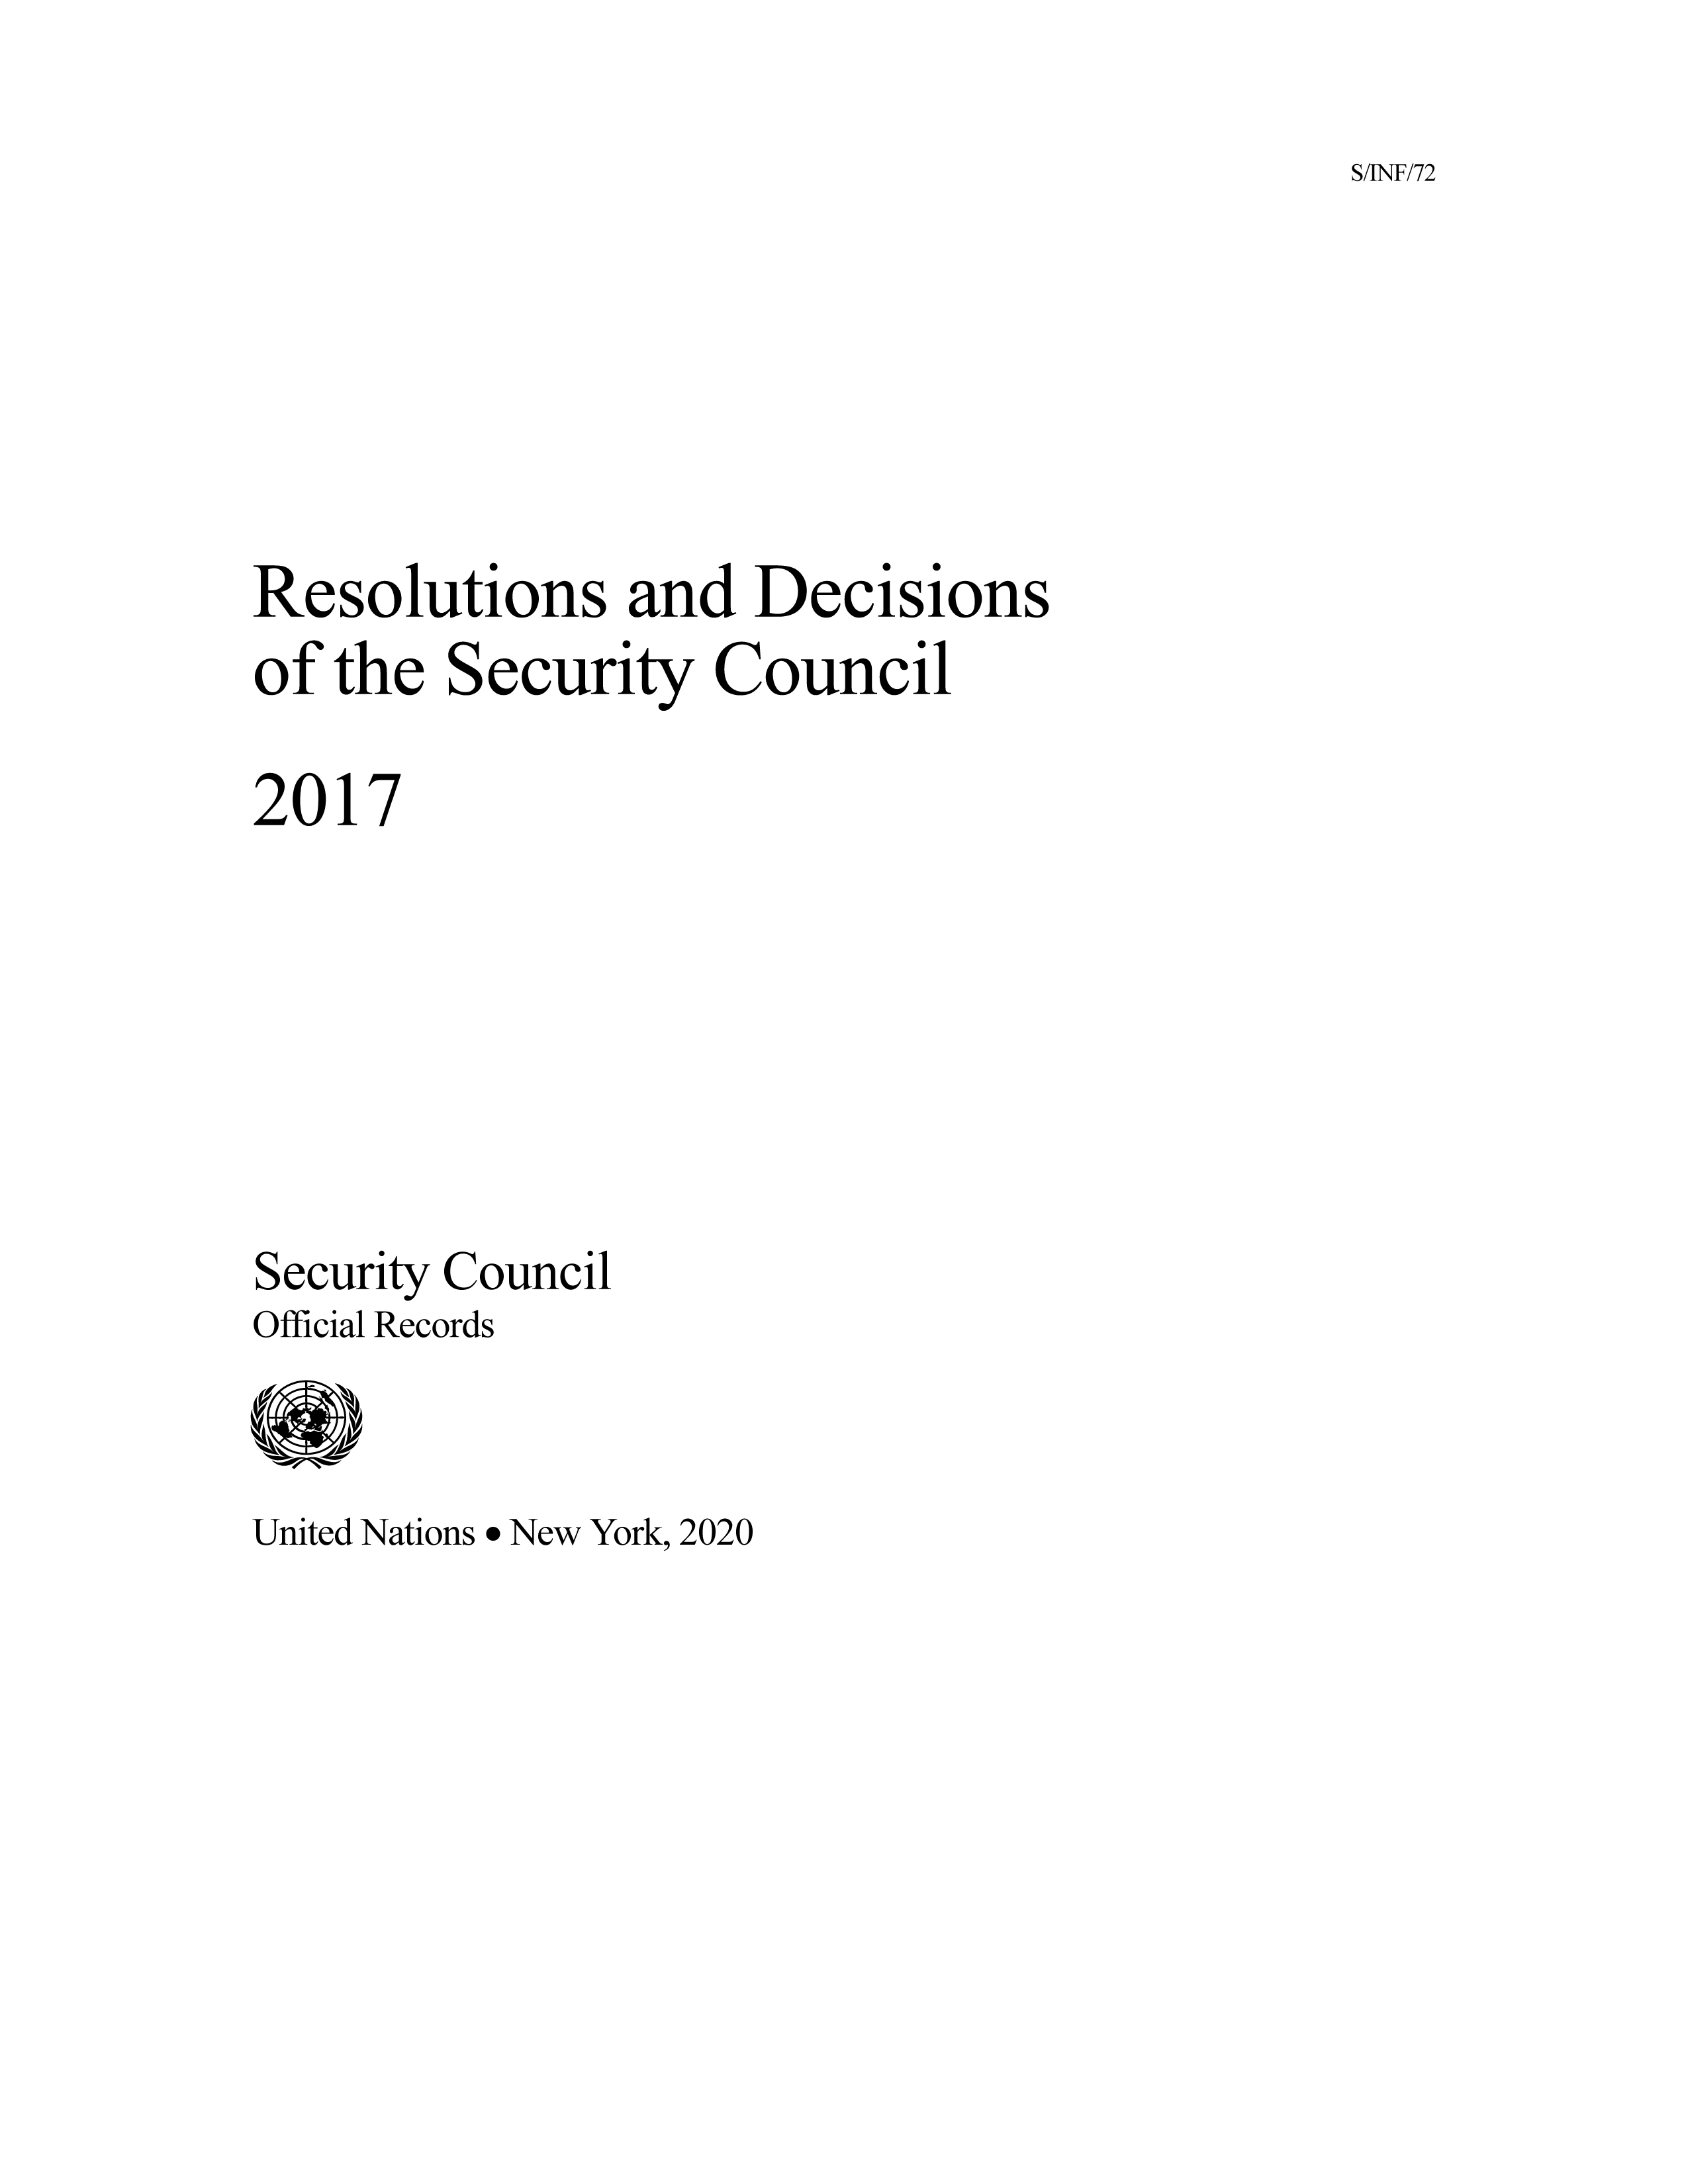 image of Resolutions and Decisions of the Security Council 2017